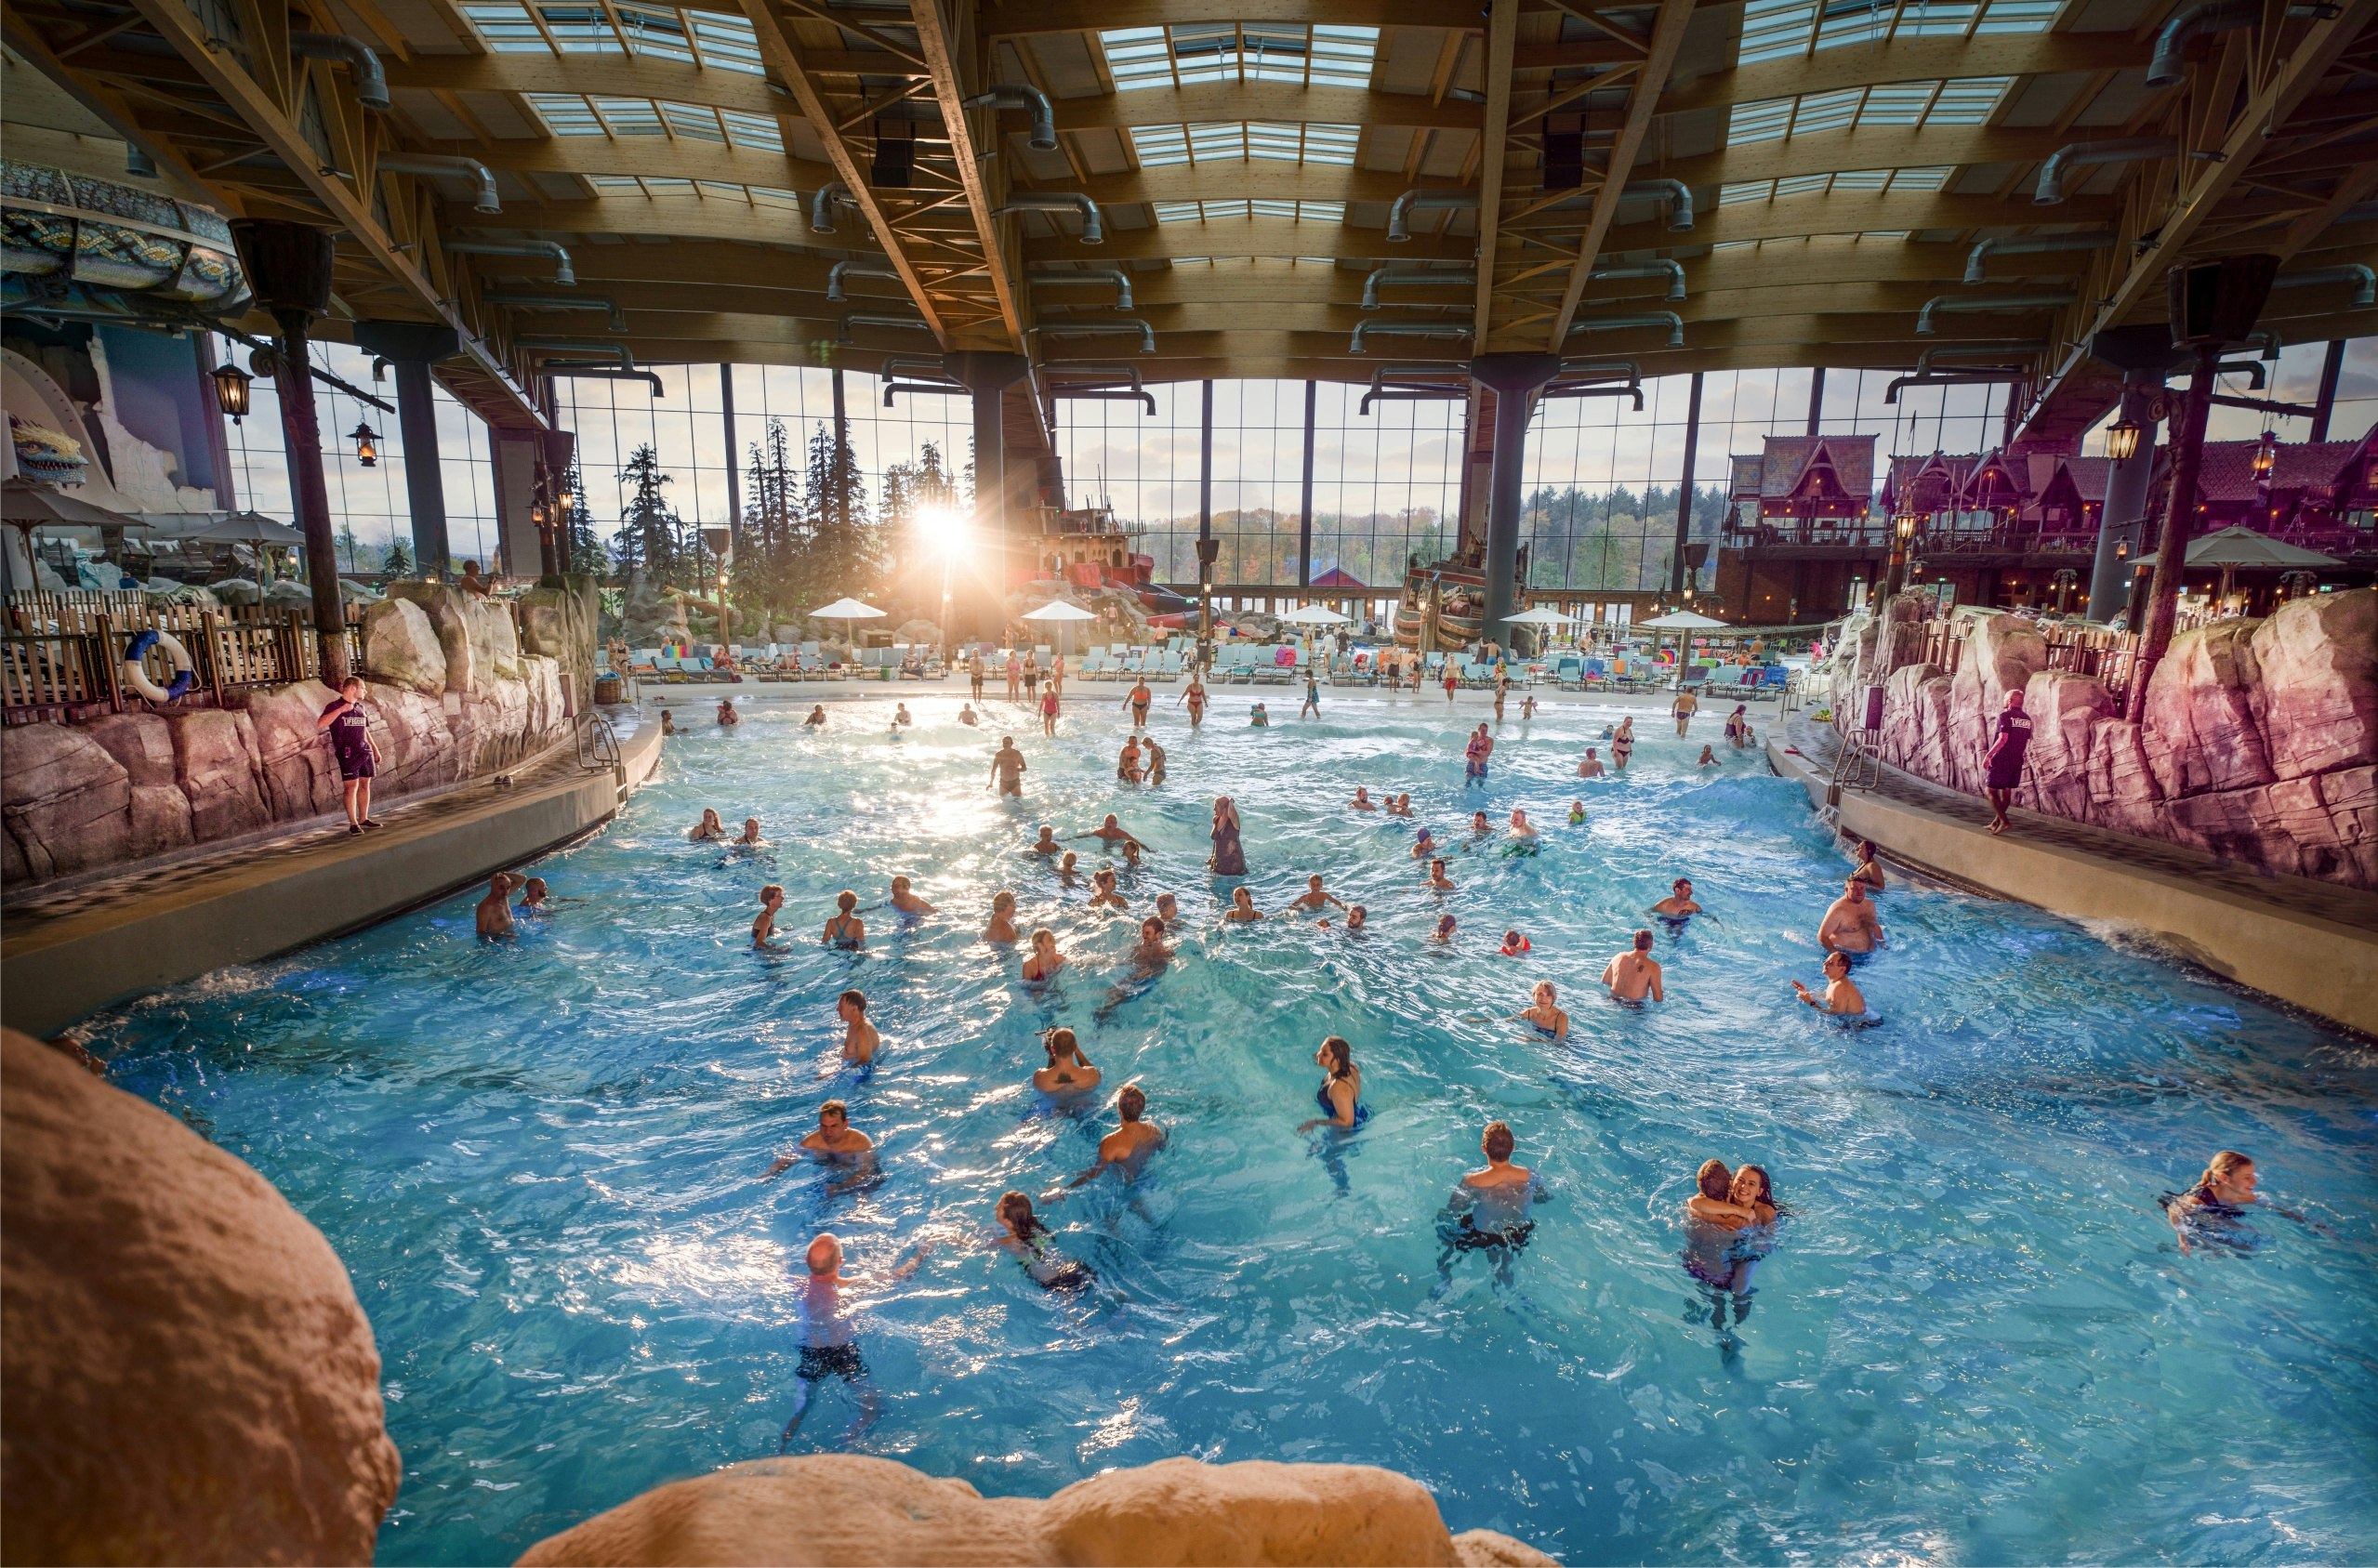 Aerial shot of people splashing about in an indoor water park